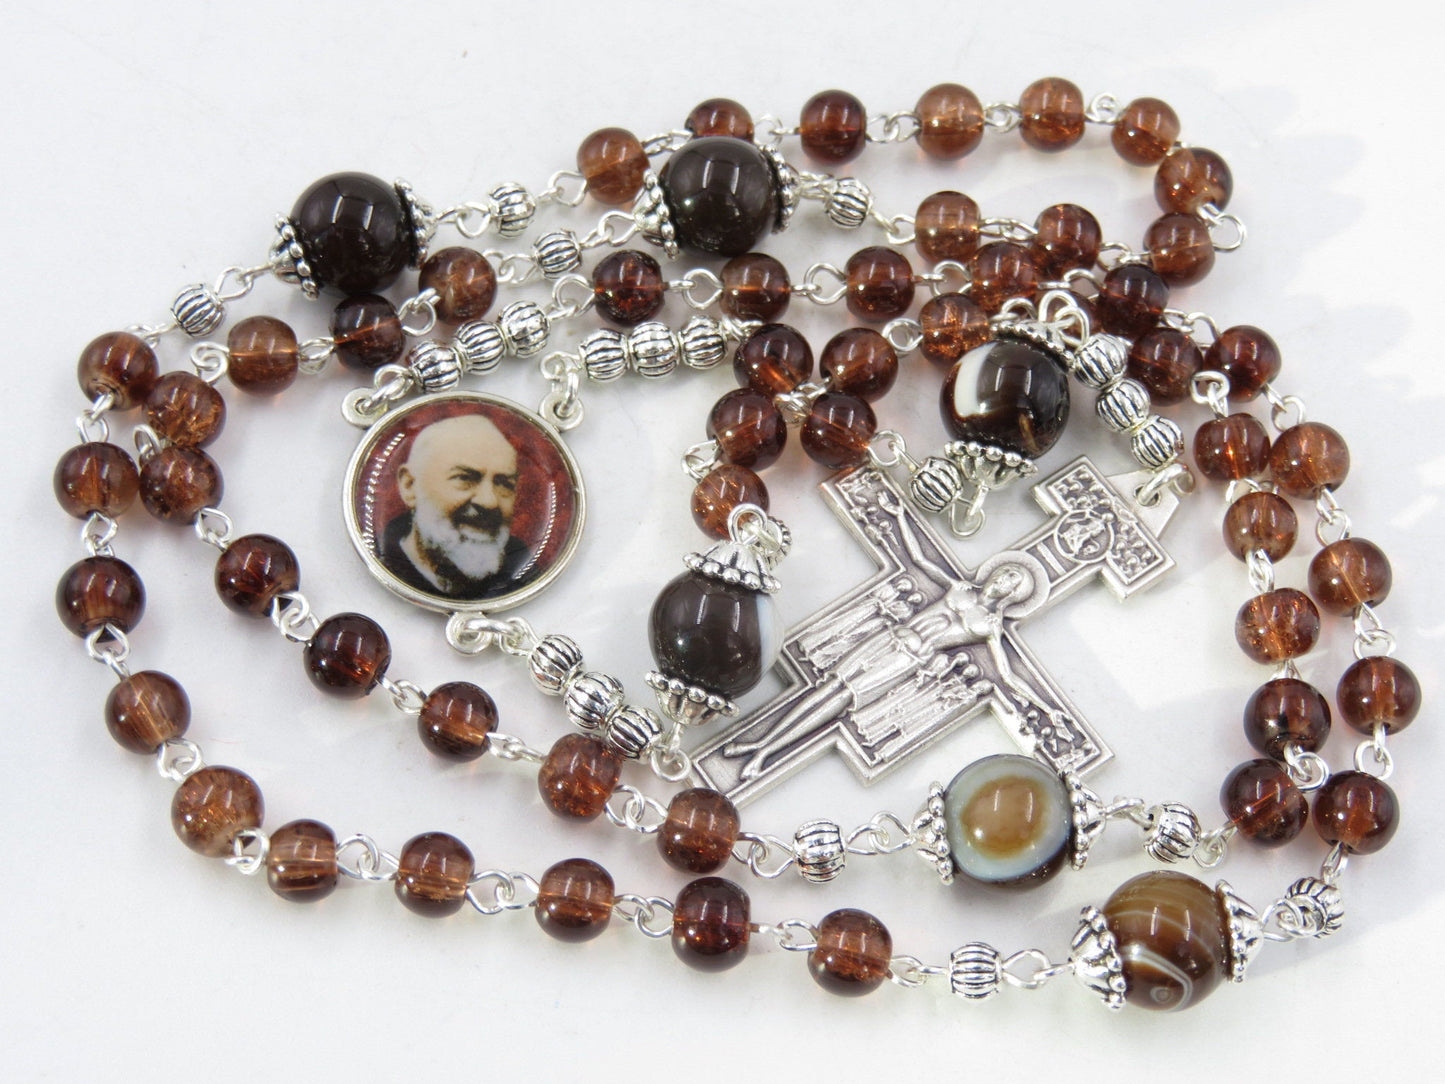 Saint Padre Pio Catholic Rosary beads, St. Pio Brown Agate Rosary, St. Damien Crucifix rosary, Our Lady of Grace rosary beads.